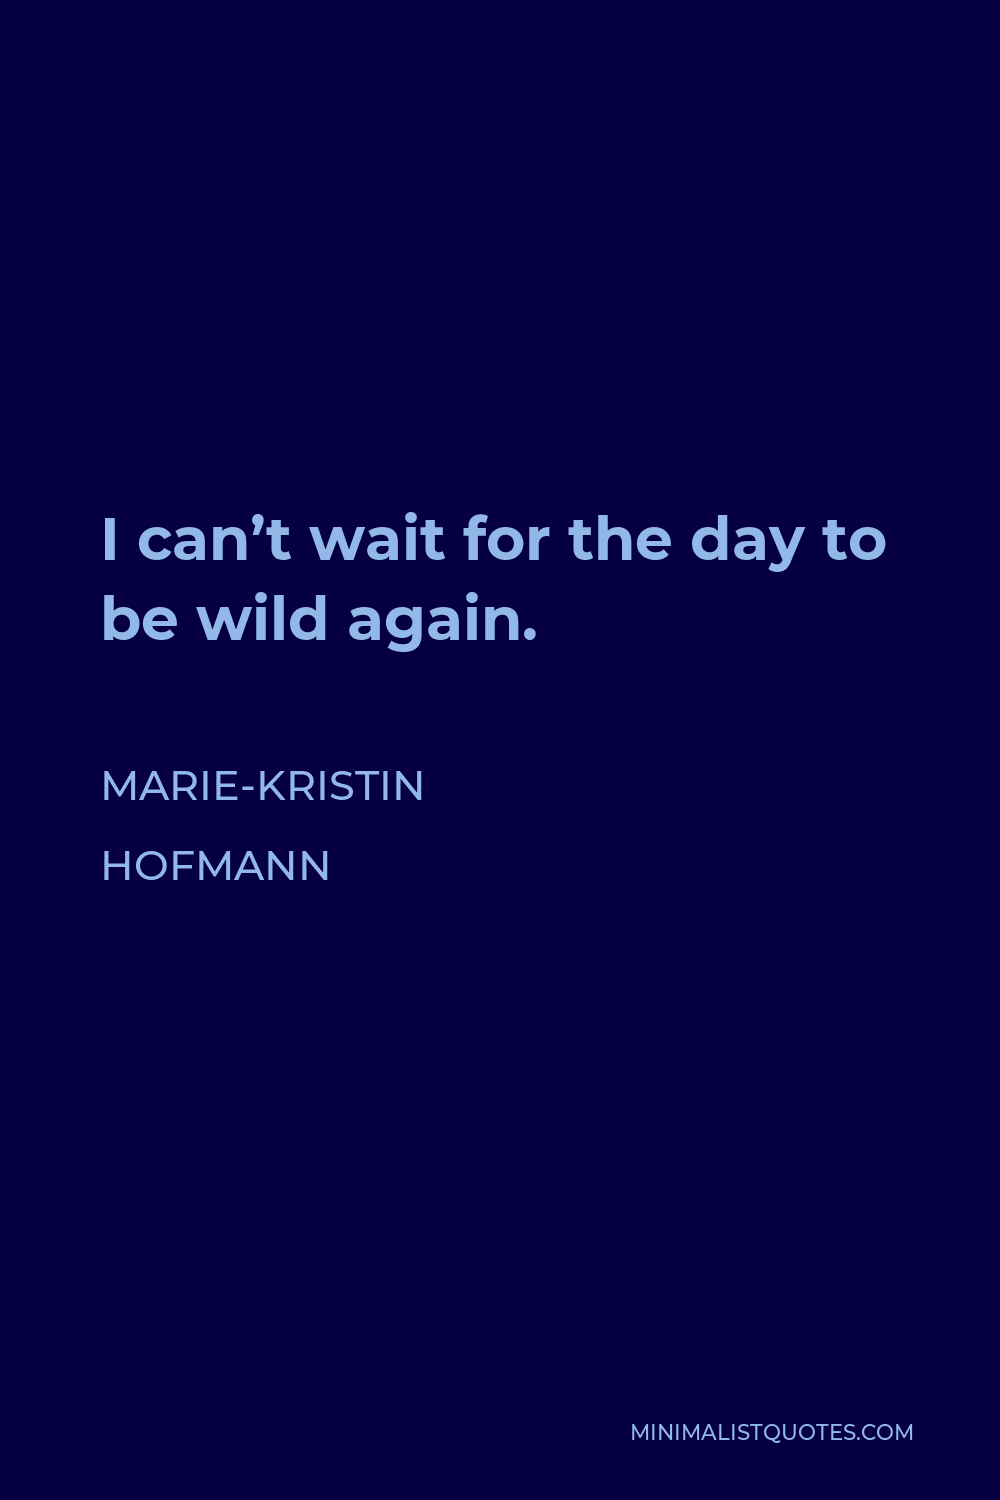 Marie-Kristin Hofmann Quote - I can’t wait for the day to be wild again.